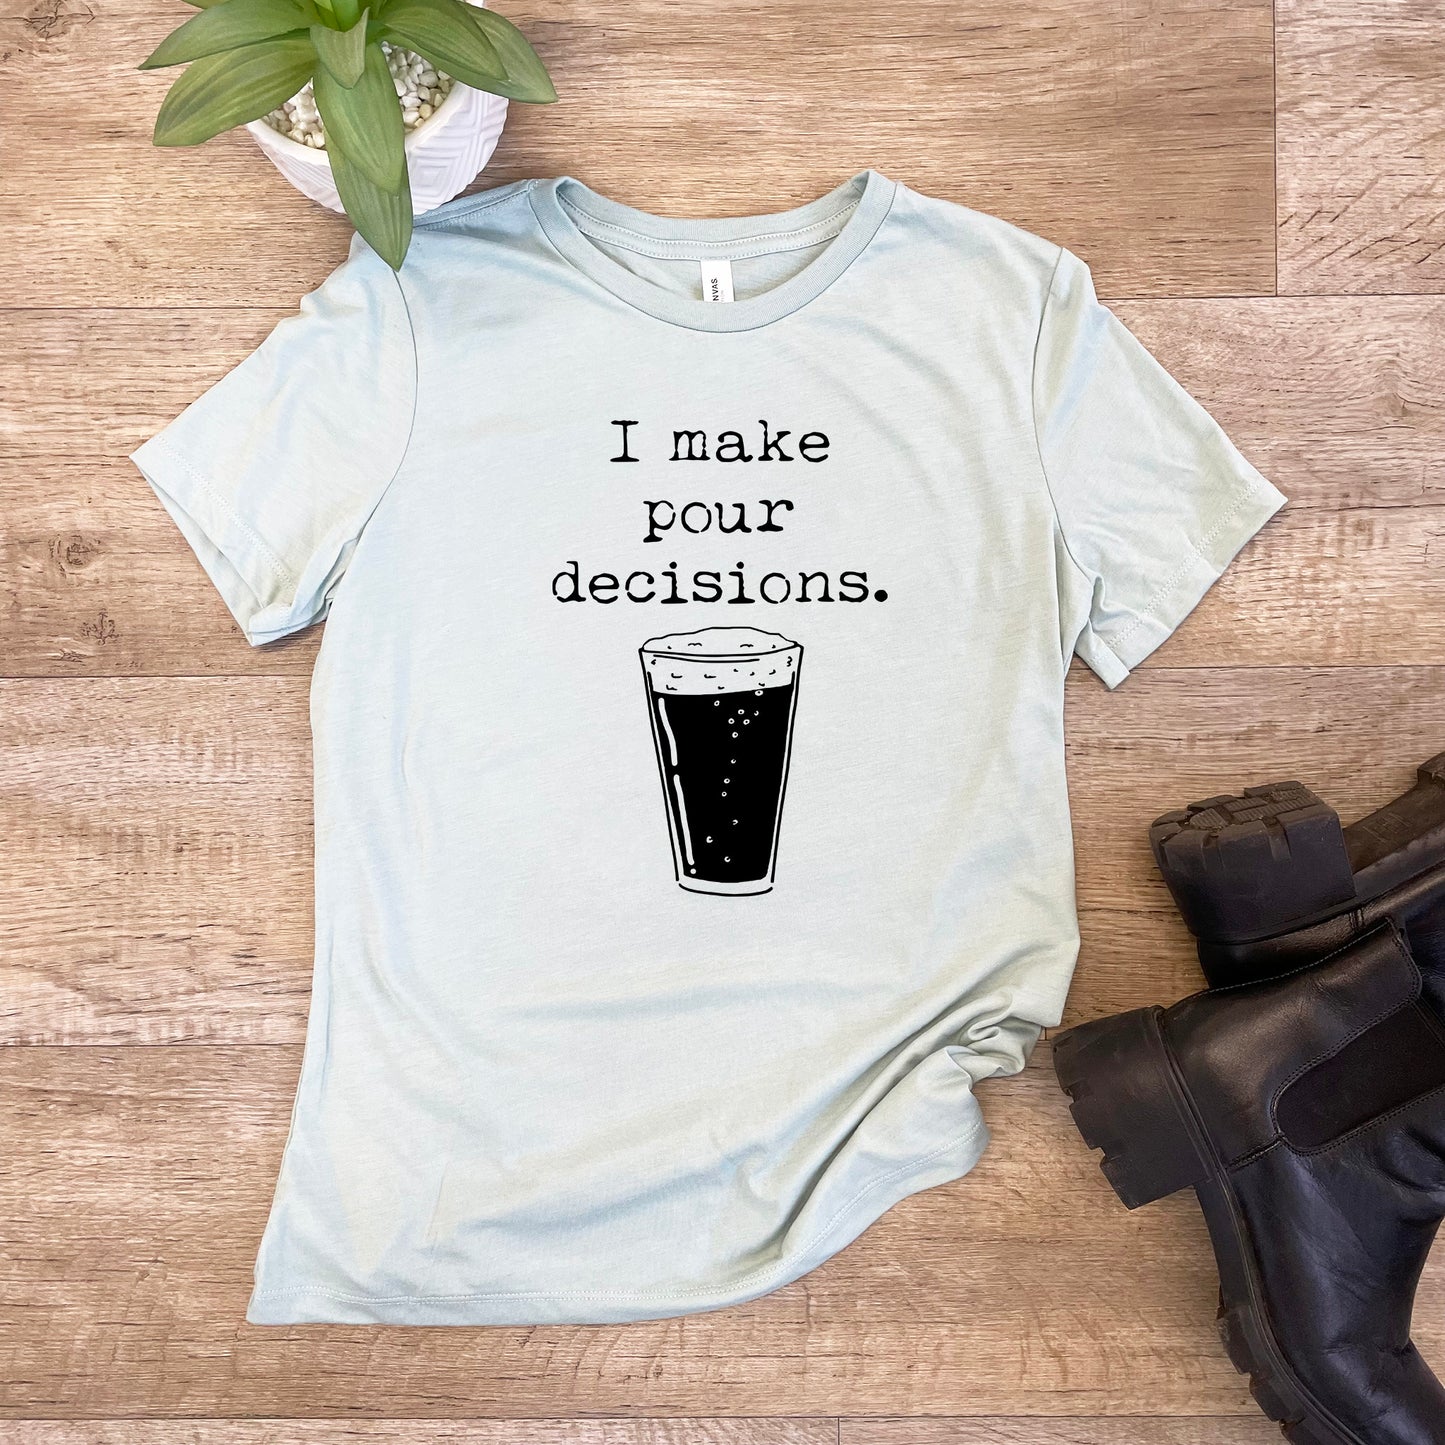 I Make Pour Decisions - Women's Crew Tee - Olive or Dusty Blue